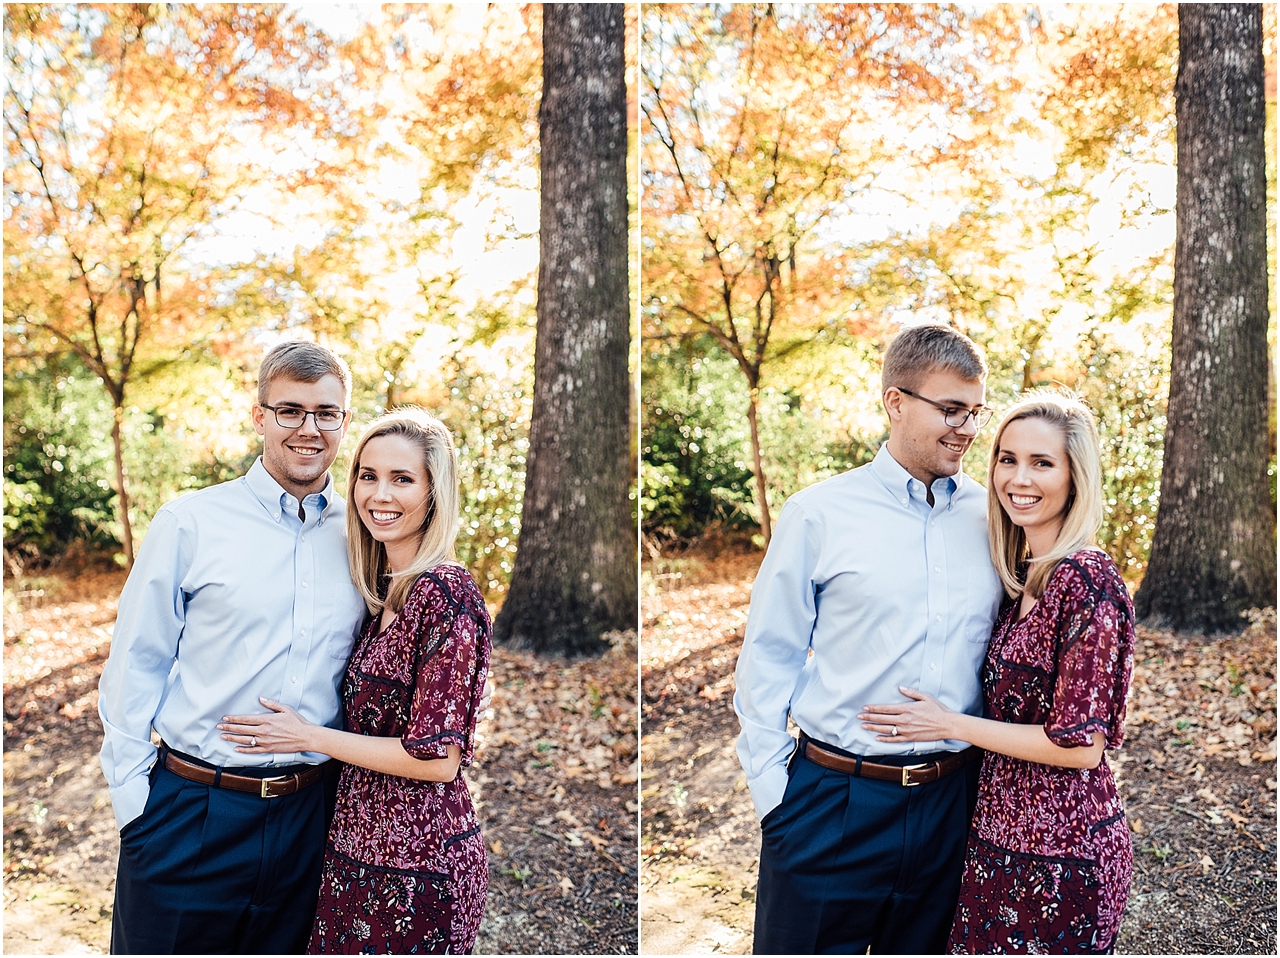  Lindsey Ann Photography - Engagement session at the Botanical Gardens in Downtown Birmingahm 